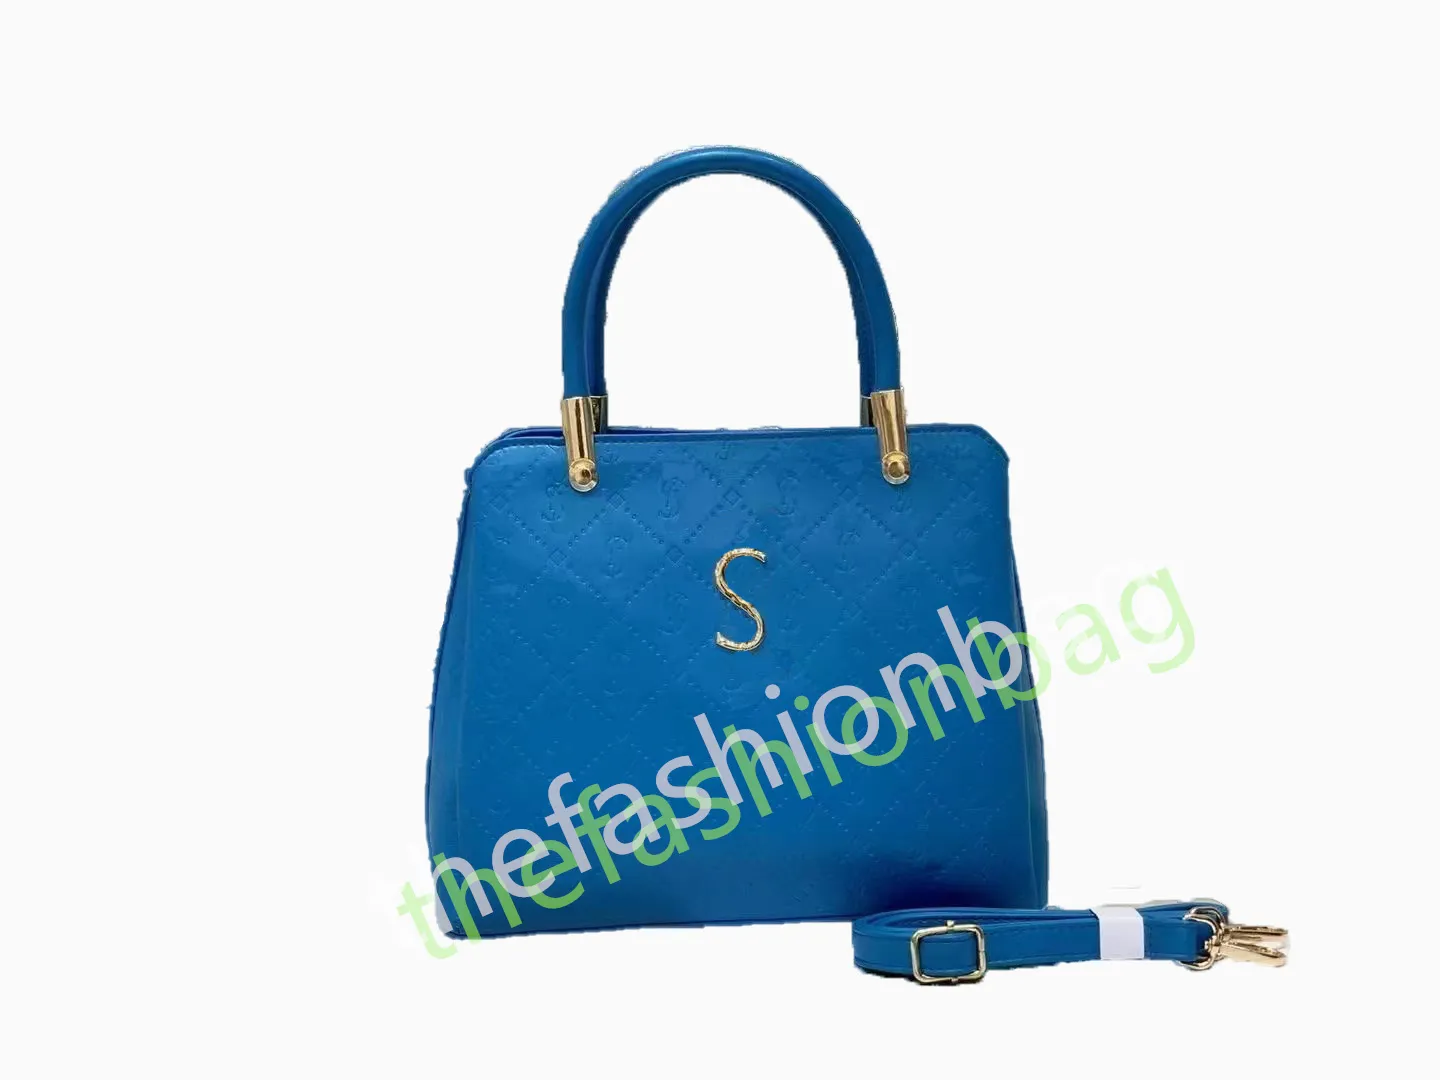 7A-Exclusive Designer Fashion Leather Embossed Premium Shopping Bag High End Whole Handbag226w